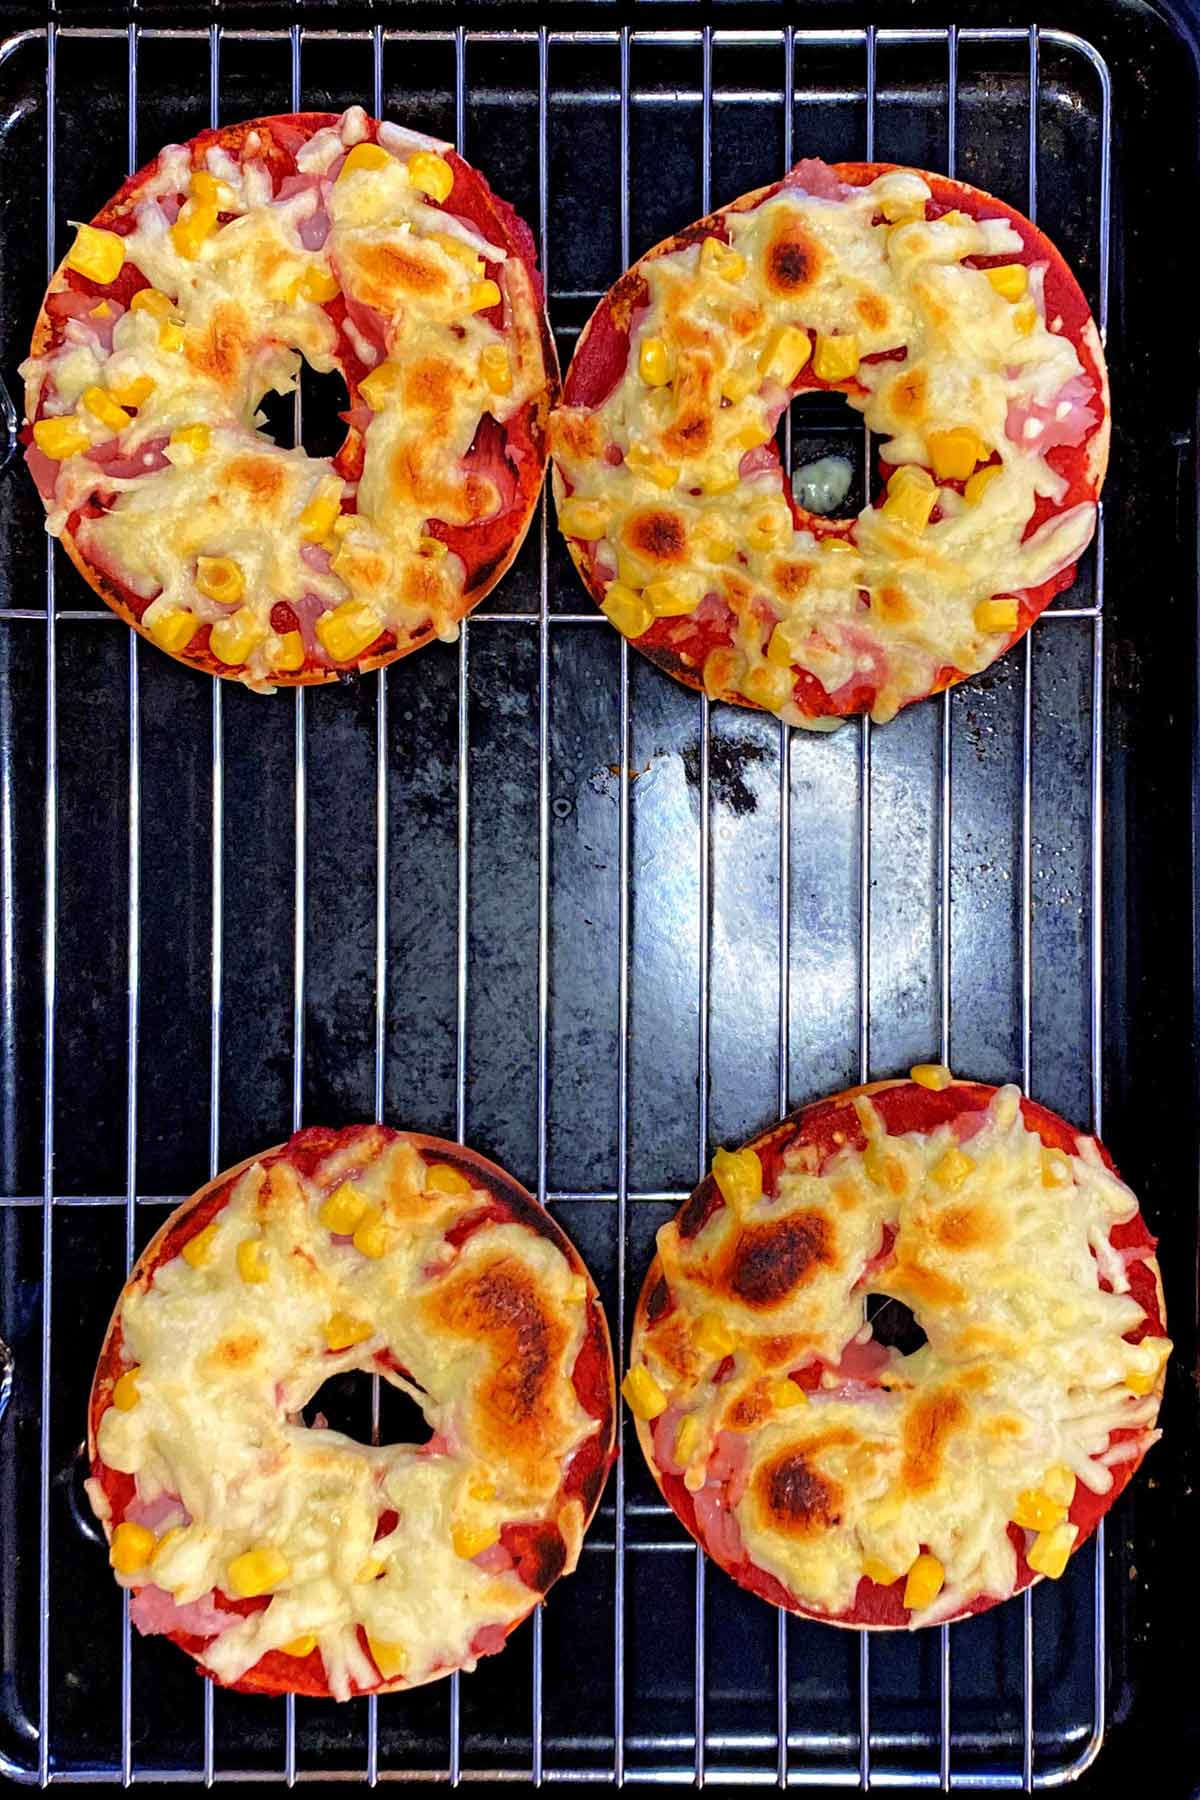 A grill pan with cooked pizza bagels on it.